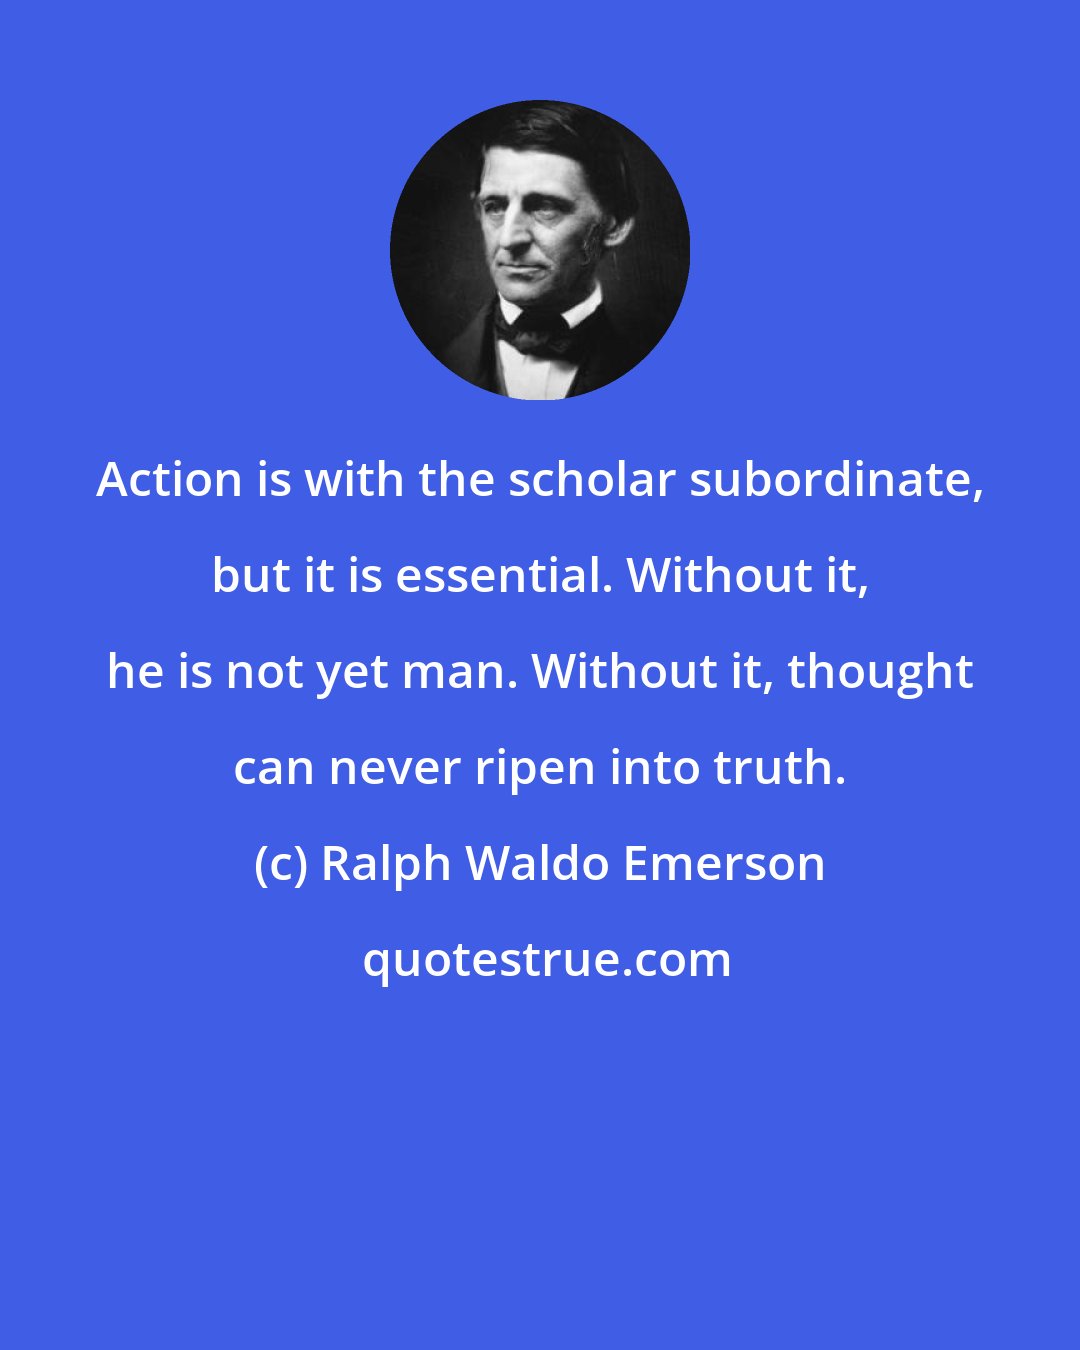 Ralph Waldo Emerson: Action is with the scholar subordinate, but it is essential. Without it, he is not yet man. Without it, thought can never ripen into truth.